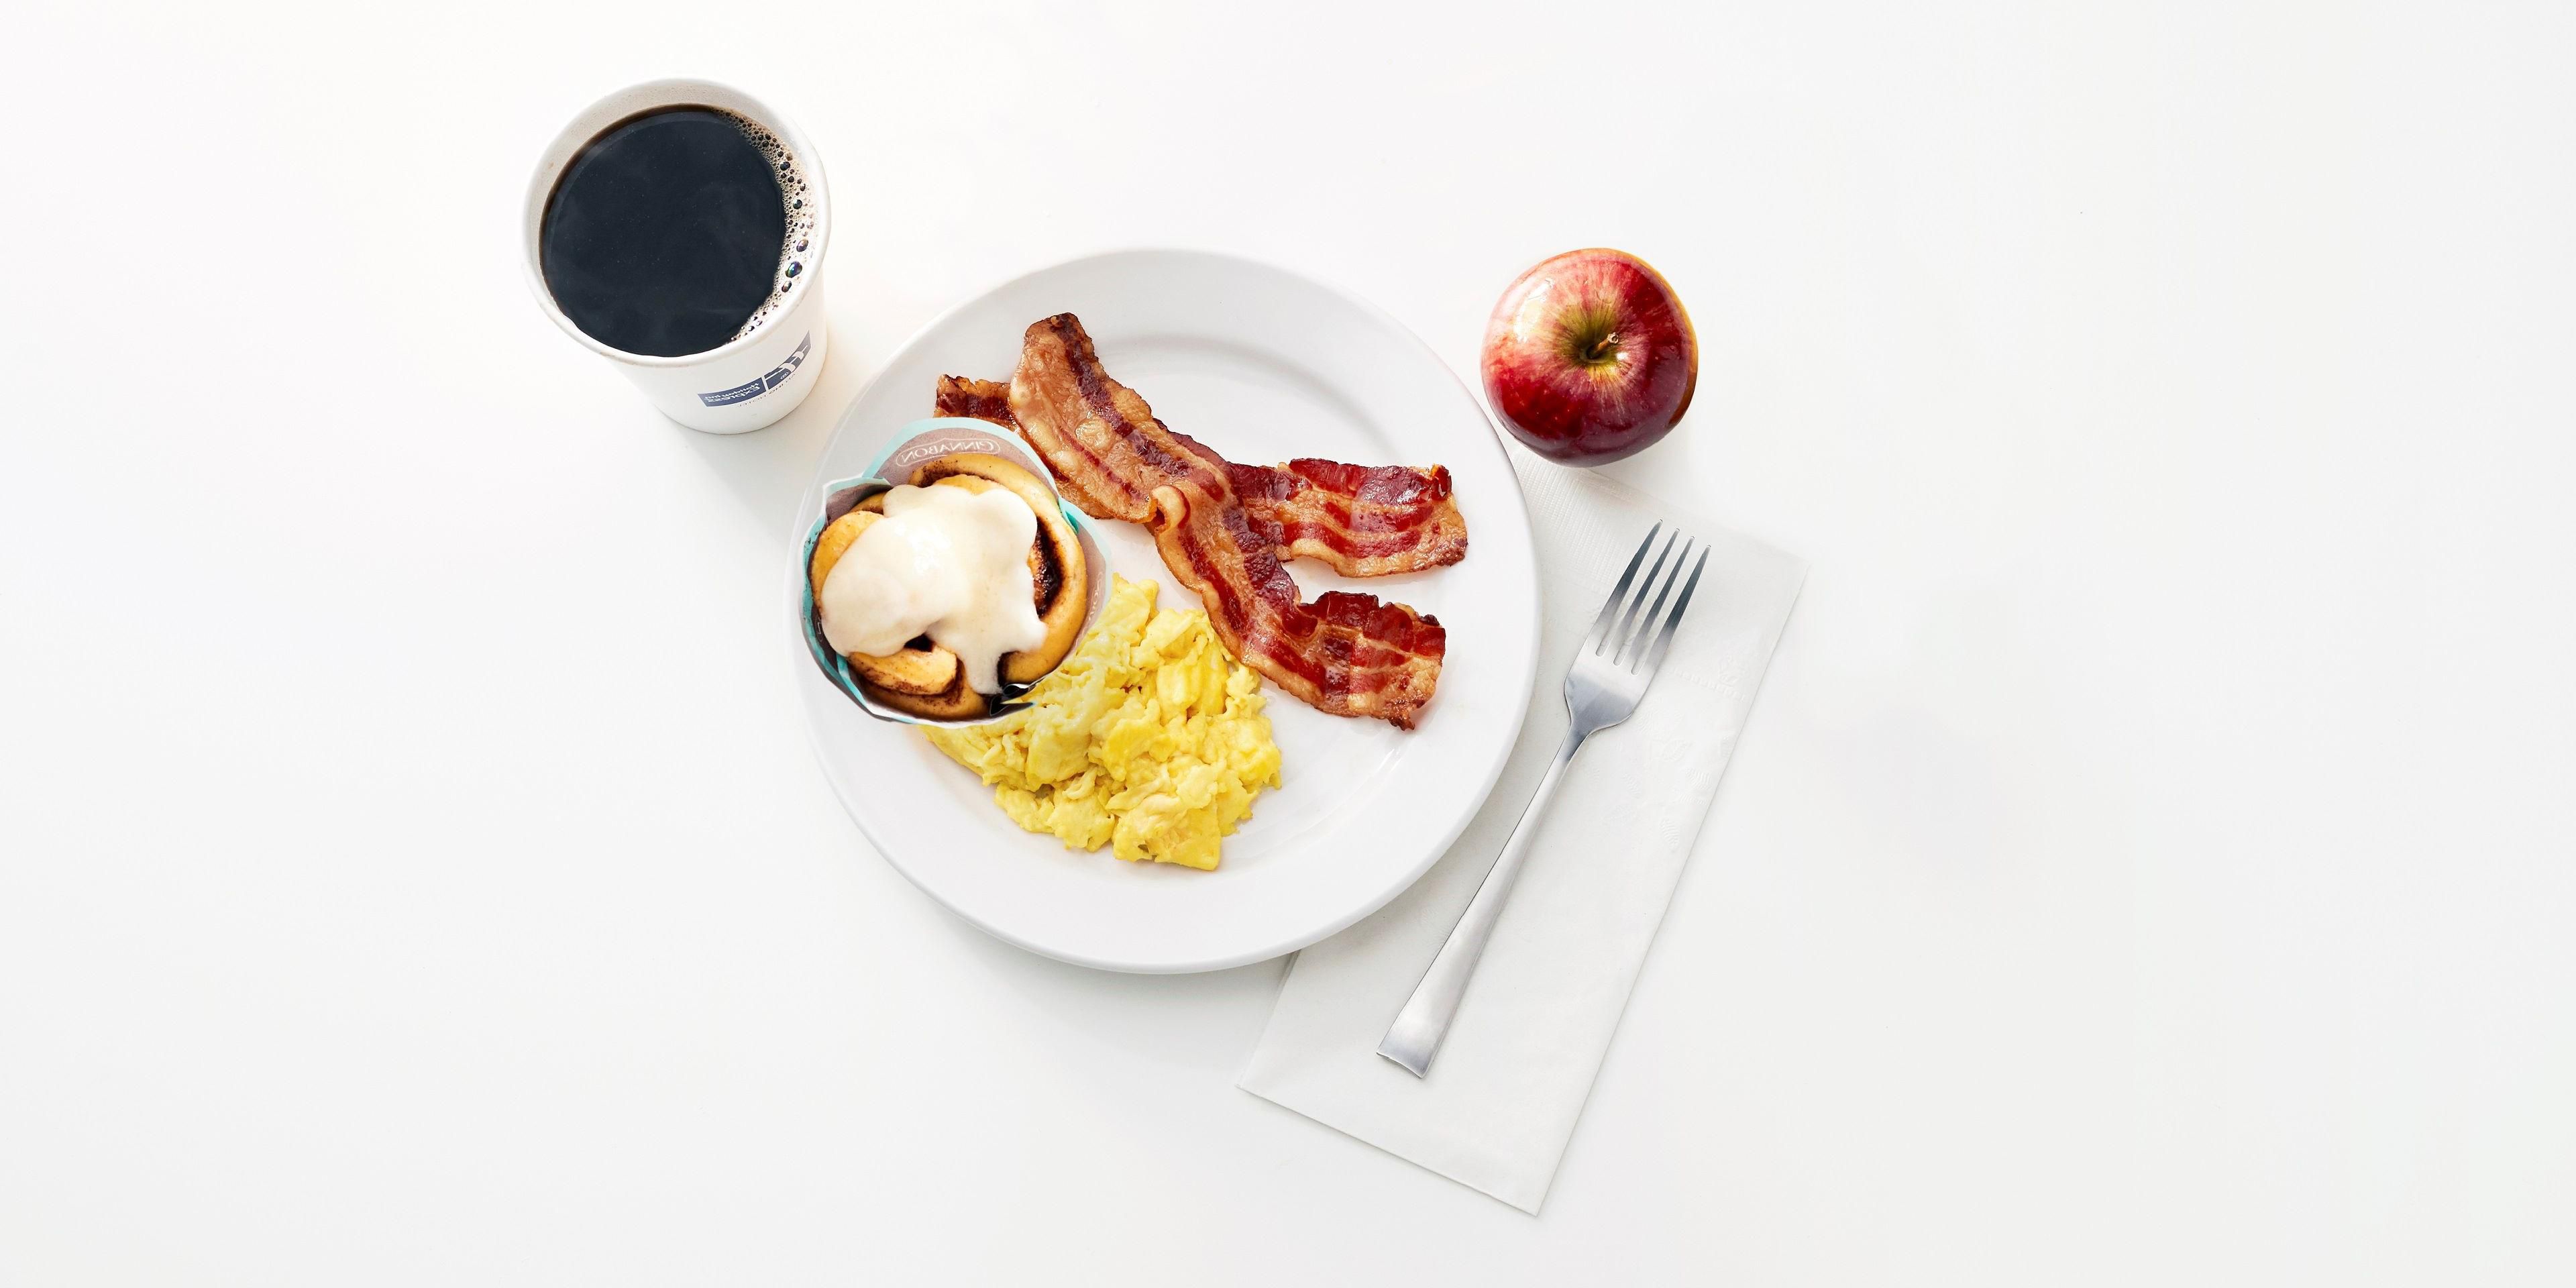 Kick start your day with our Express Start Breakfast, with grab ‘n’ go options and favorites such as eggs and bacon, hot pancakes, our signature cinnamon rolls and fresh coffee. Offered from 6:30am - 9:30am.